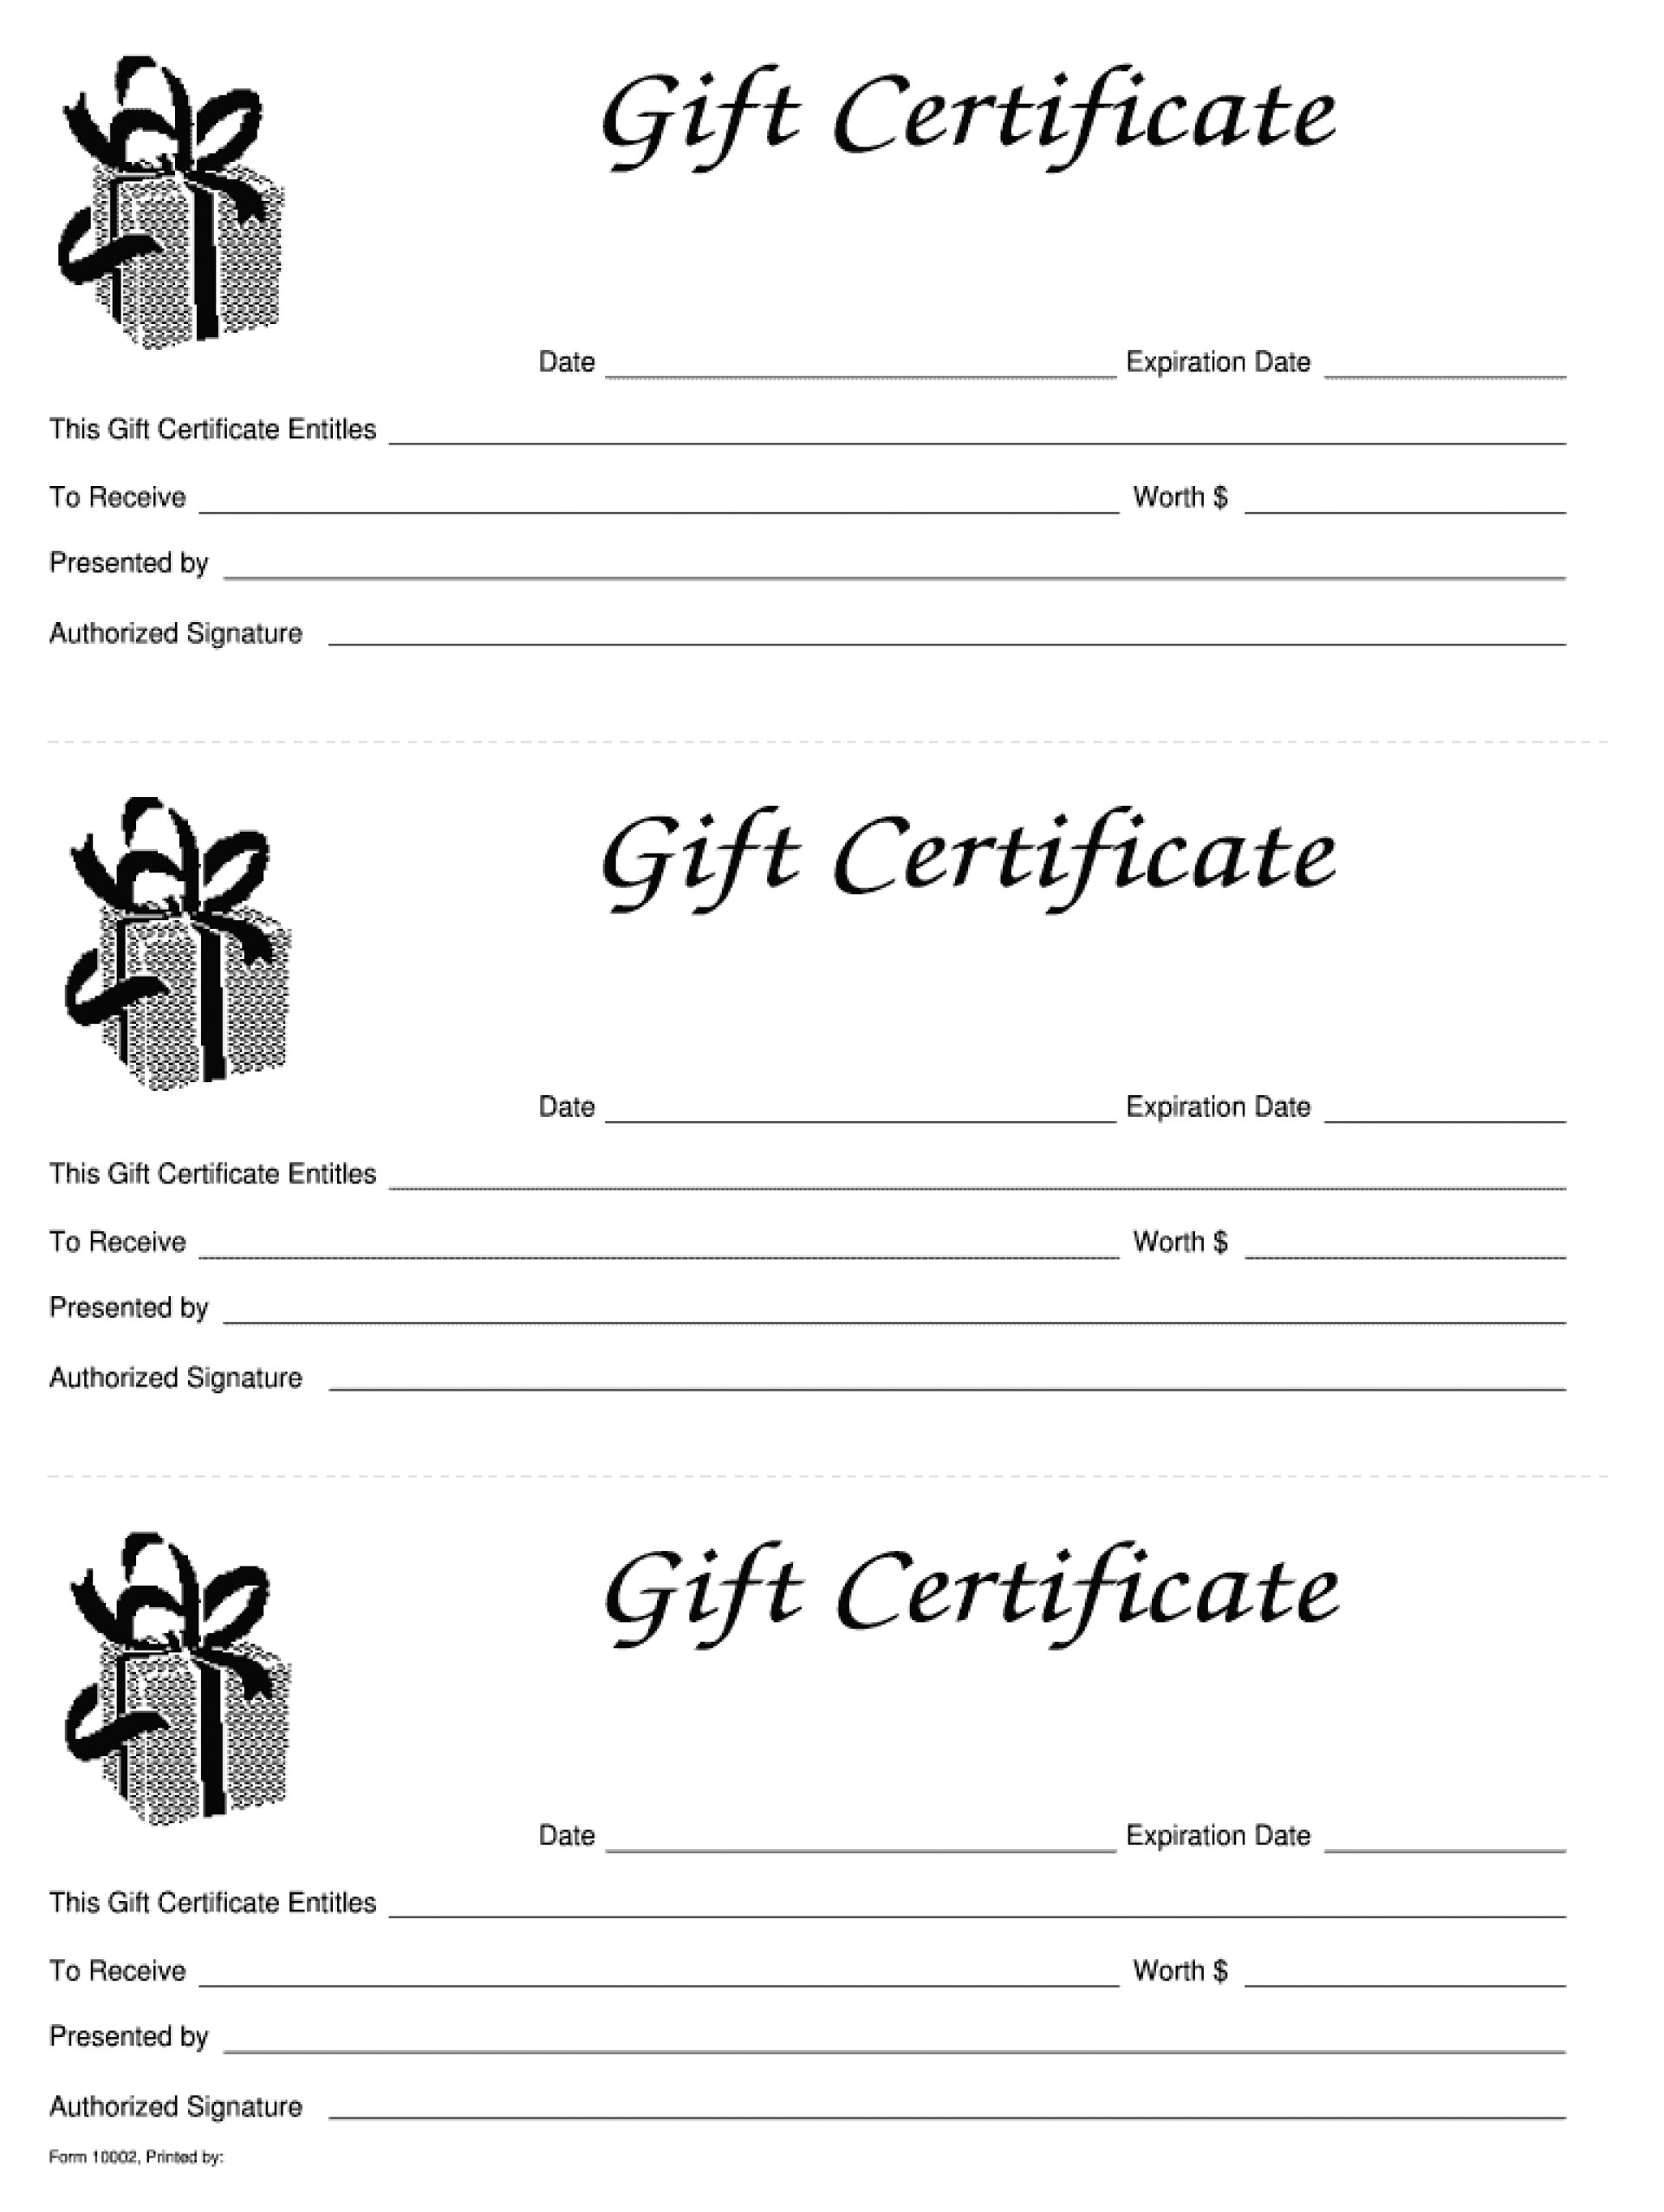 012 Gift Certificate Template Free Remarkable Ideas Massage In Custom Gift Certificate Template